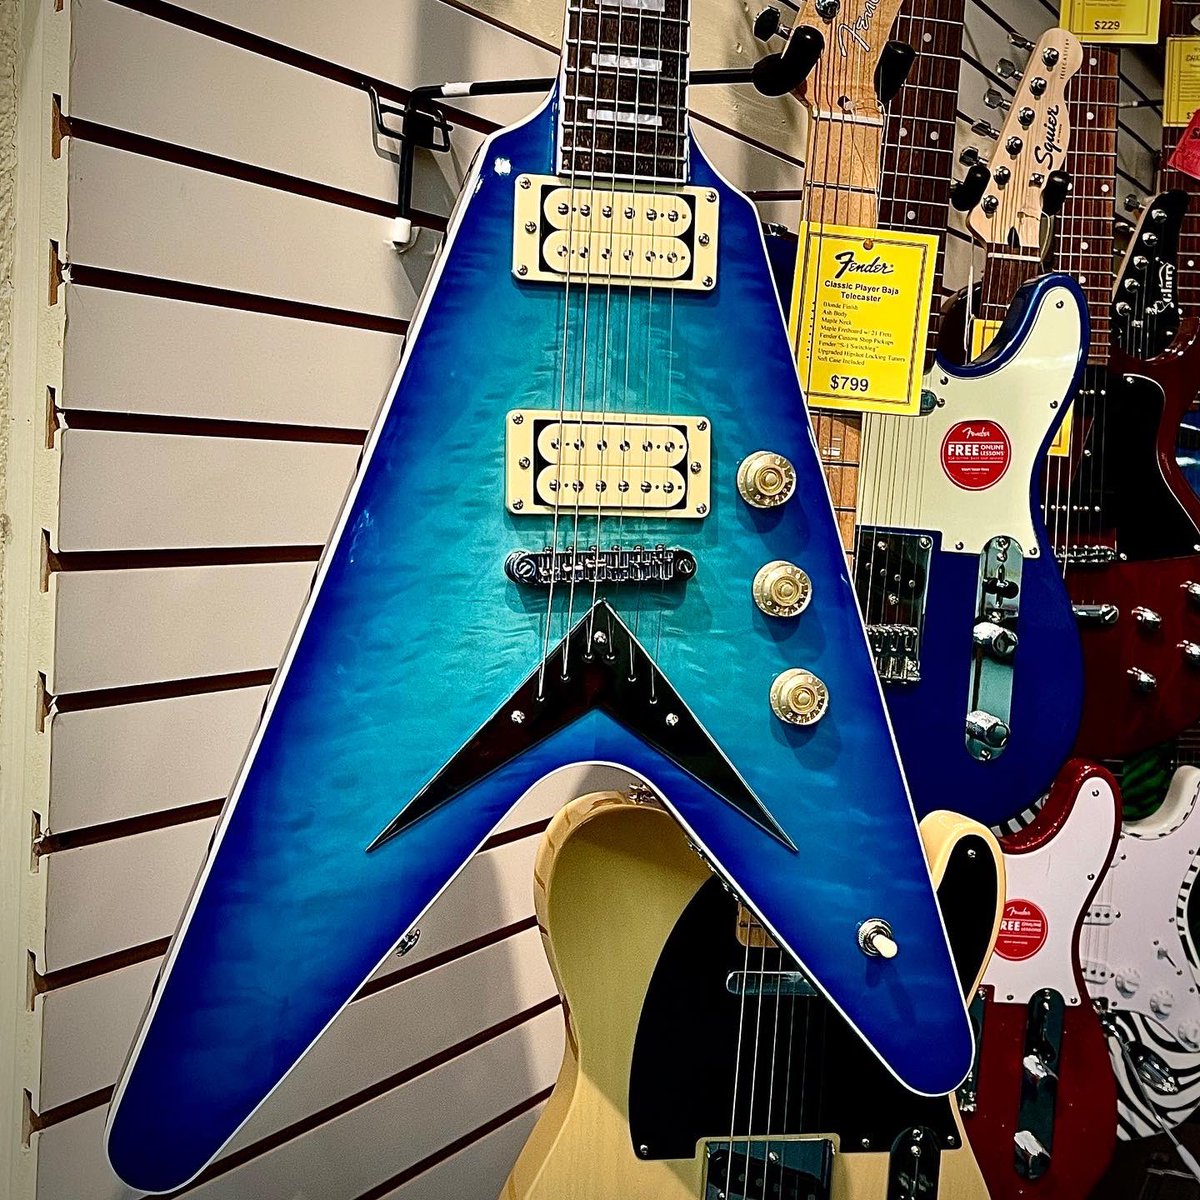 These new guitars from Firefly look, play, and sound amazing! 
🎸
#grandslamguitars #cooperstownny #guitar #cooperstown #ny #upstateny #guitars #fireflyguitars #firefly #flyingv #semihollow #hollowbodyguitar #es335 #flamemaple #spalted #guitarstore #guitarshop